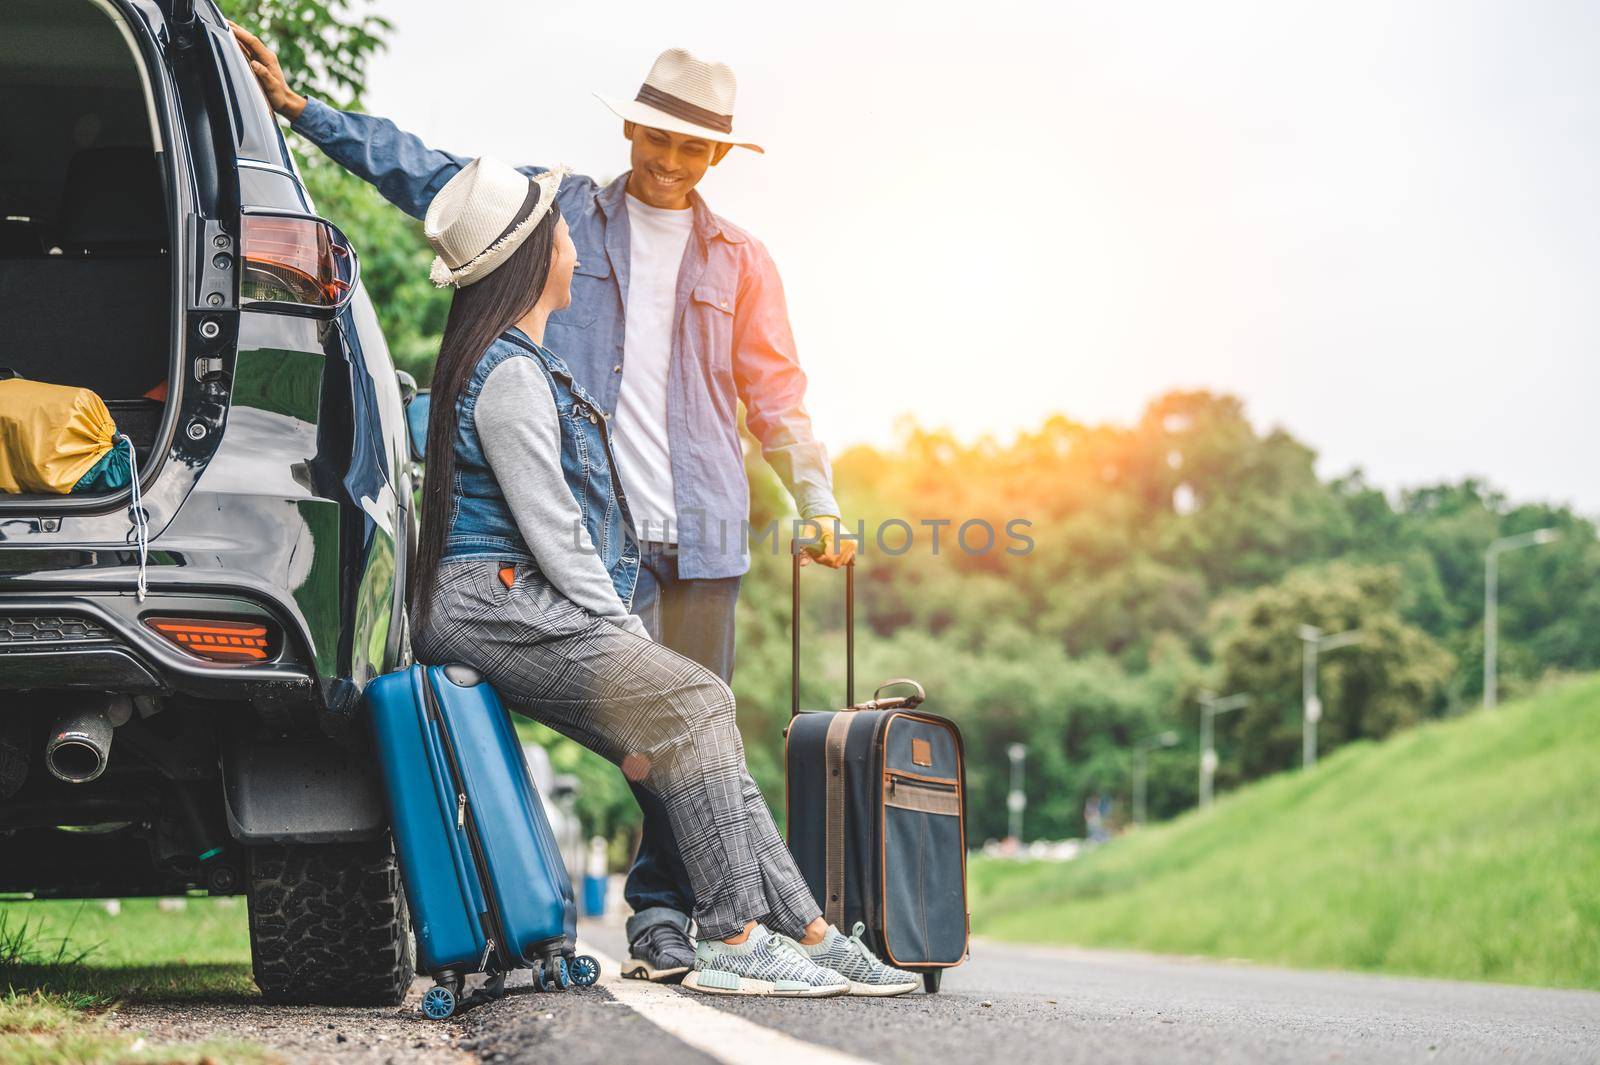 Closeup lower body of Asian couple relaxing on SUV car trunk with yellow trolly luggage along road trip with mountain hill background. Freedom road life. People lifestyle and transportation travel by MiniStocker